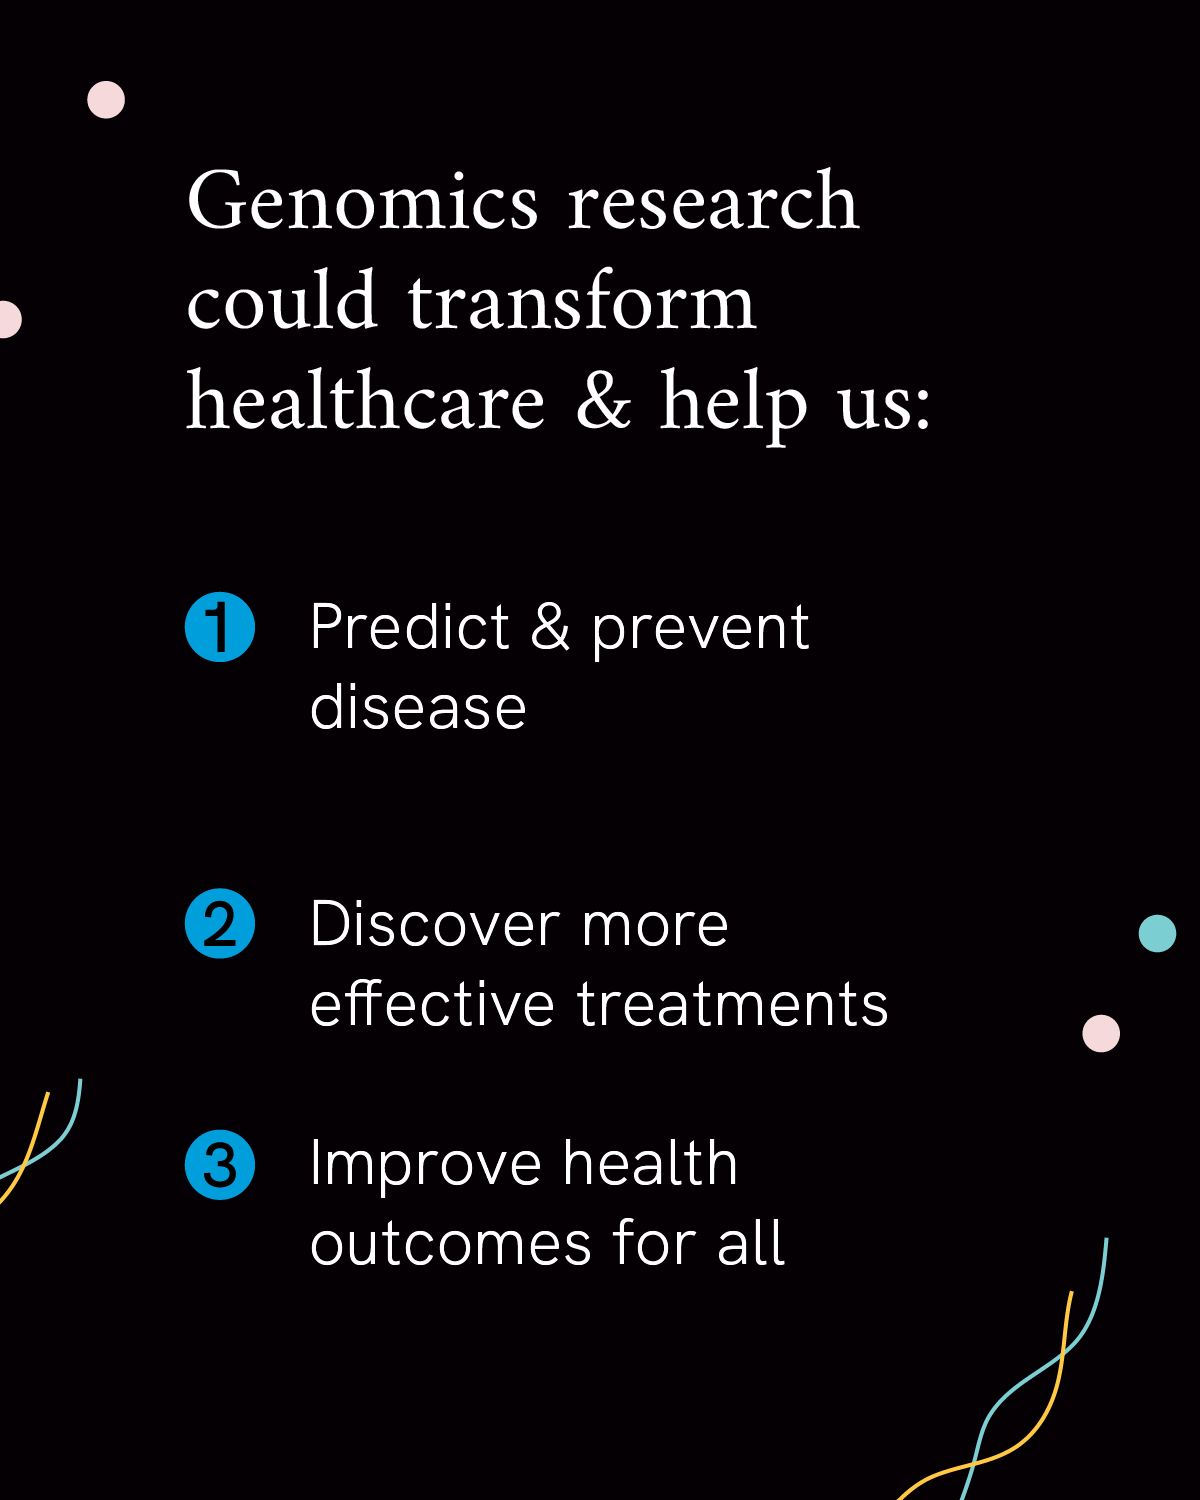 Infographic reads “Genomics research could transform healthcare & help us:” followed by “1: Predict & prevent disease,” “2: Discover more effective treatments,” “3: Improve health outcomes for all,” on a black background.